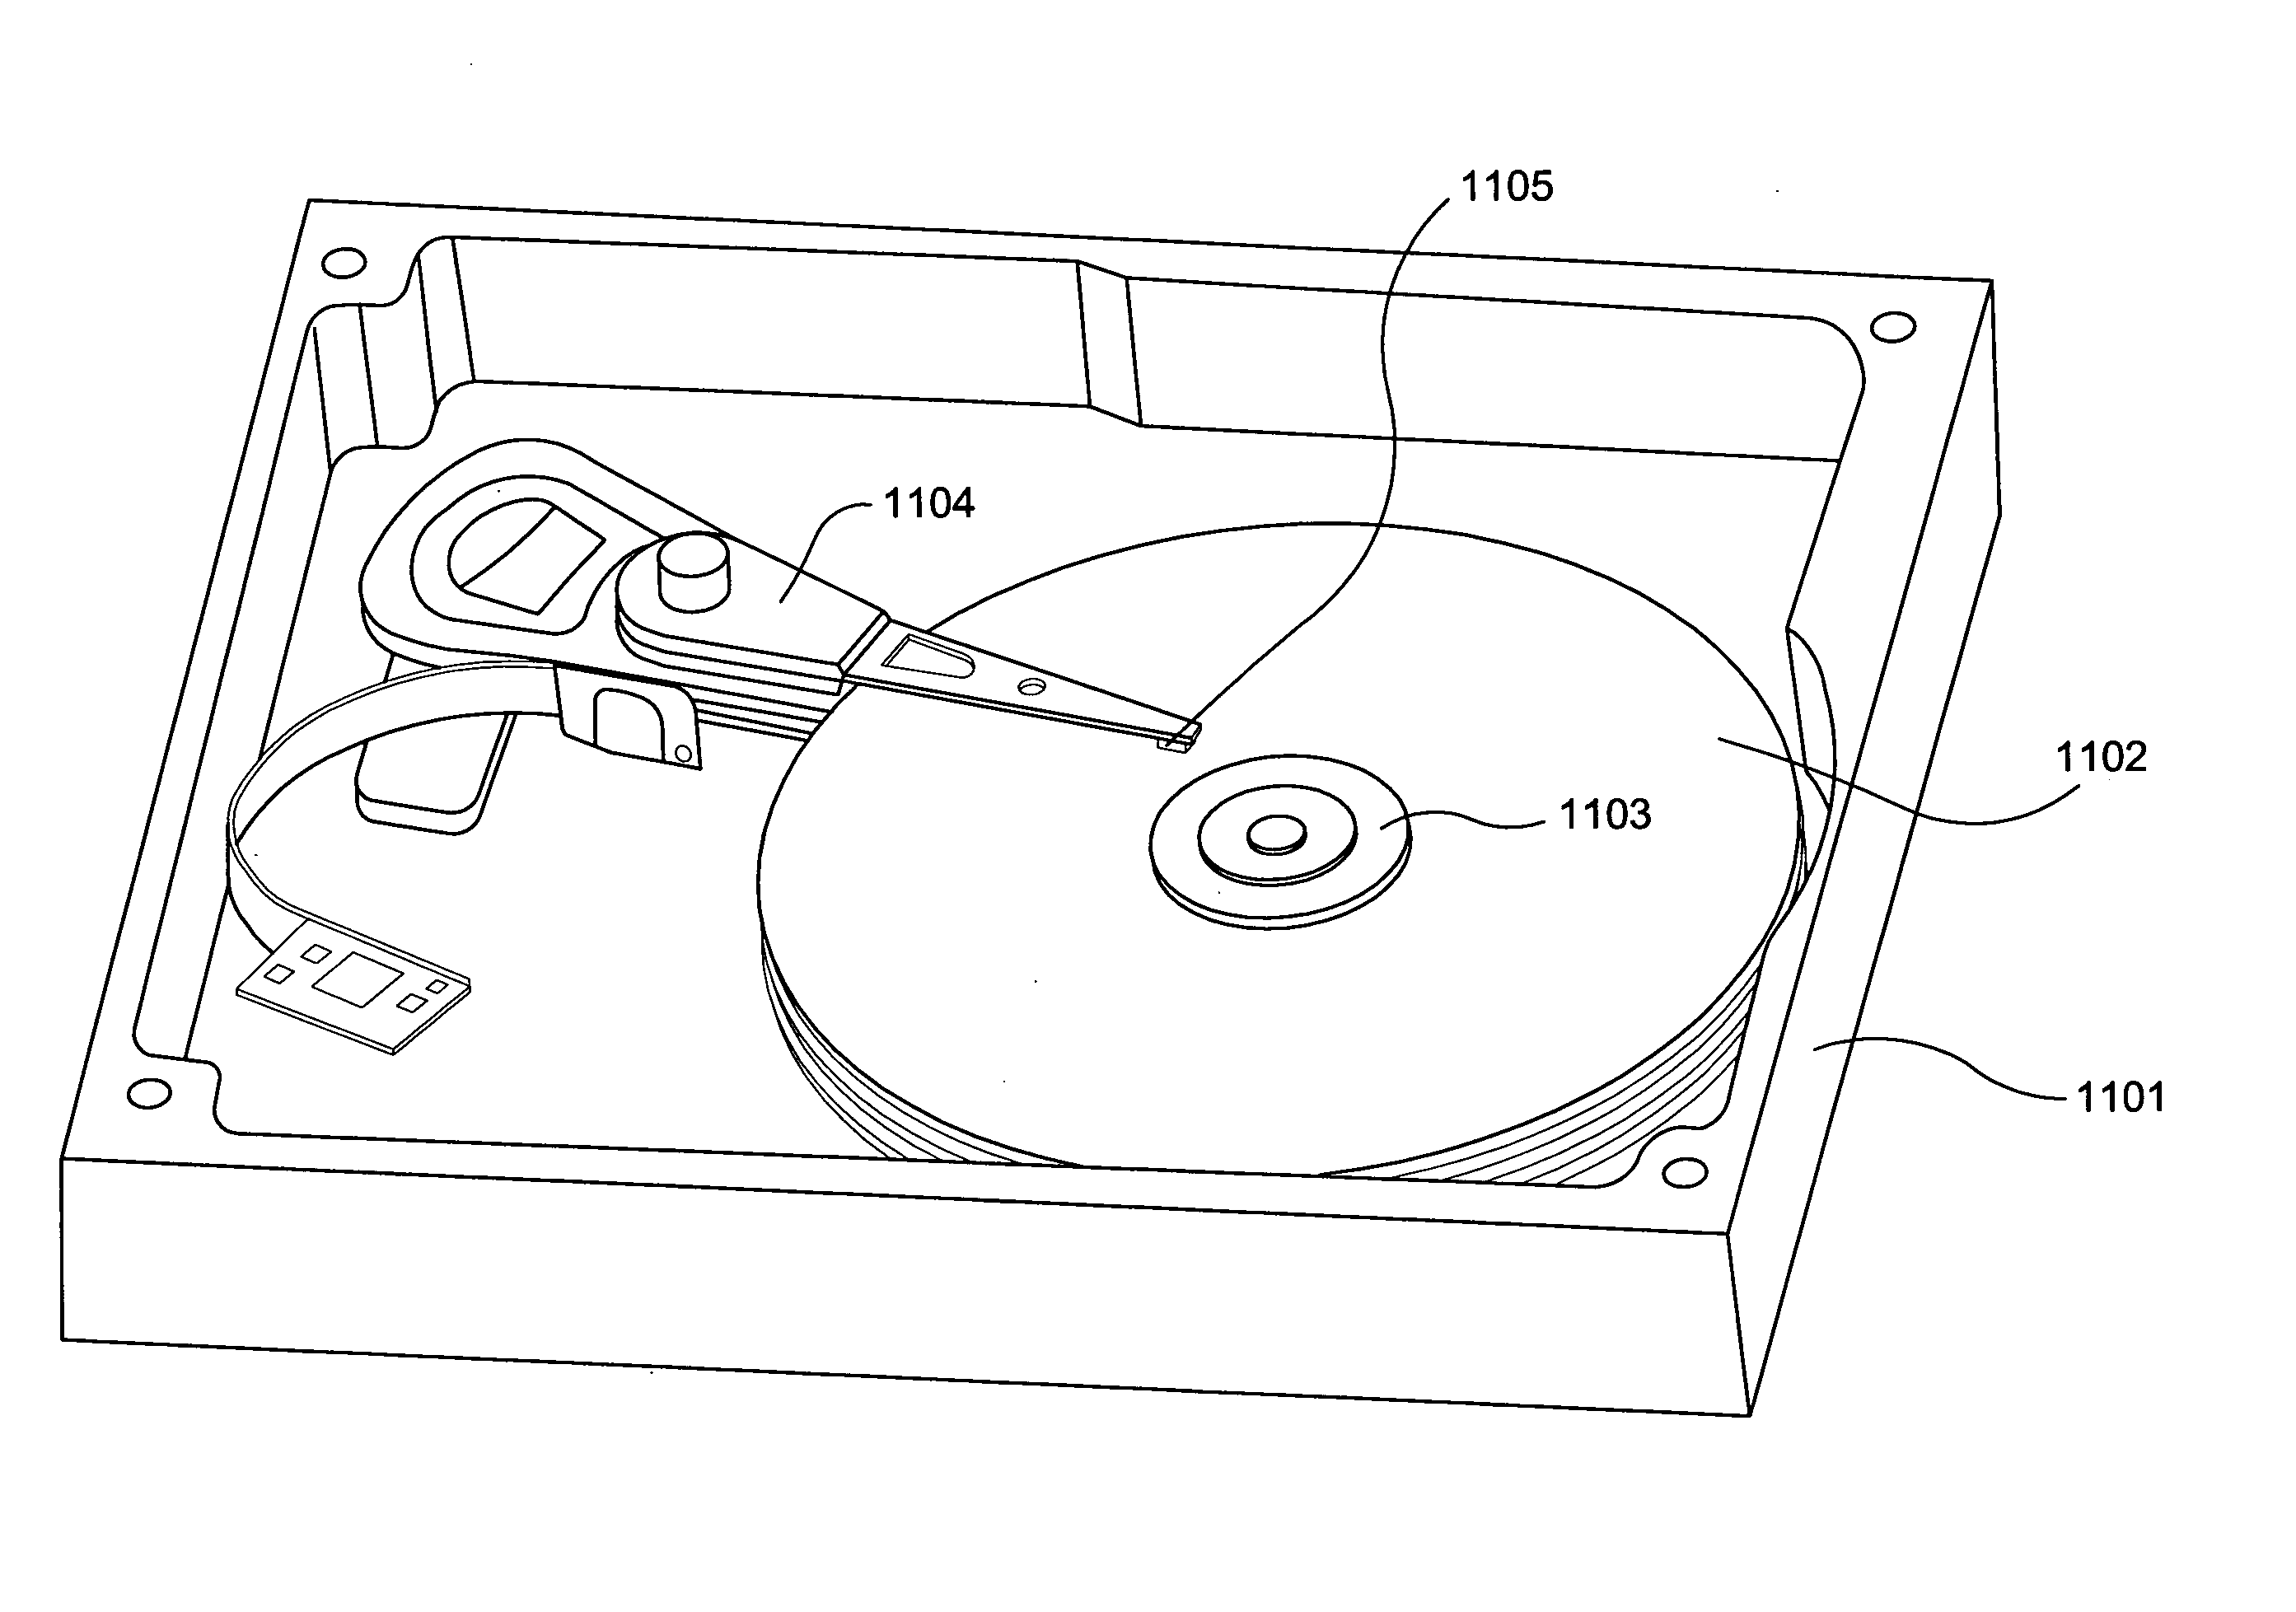 Micro-actuator having at least one segmented flexible side arm, and method of making the same